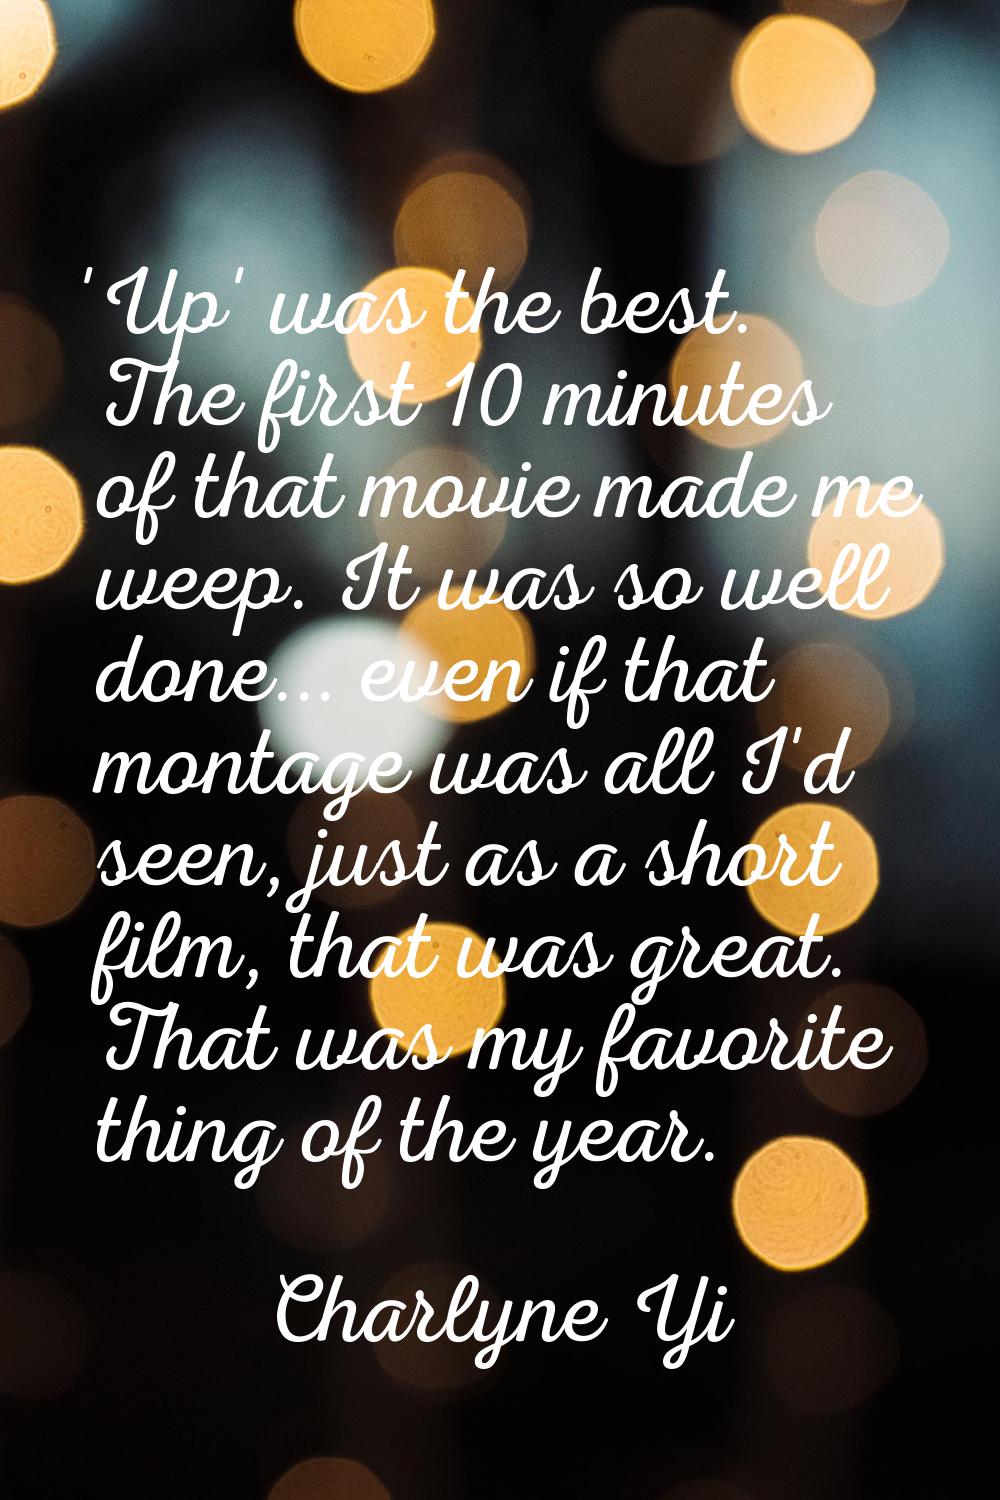 'Up' was the best. The first 10 minutes of that movie made me weep. It was so well done... even if 